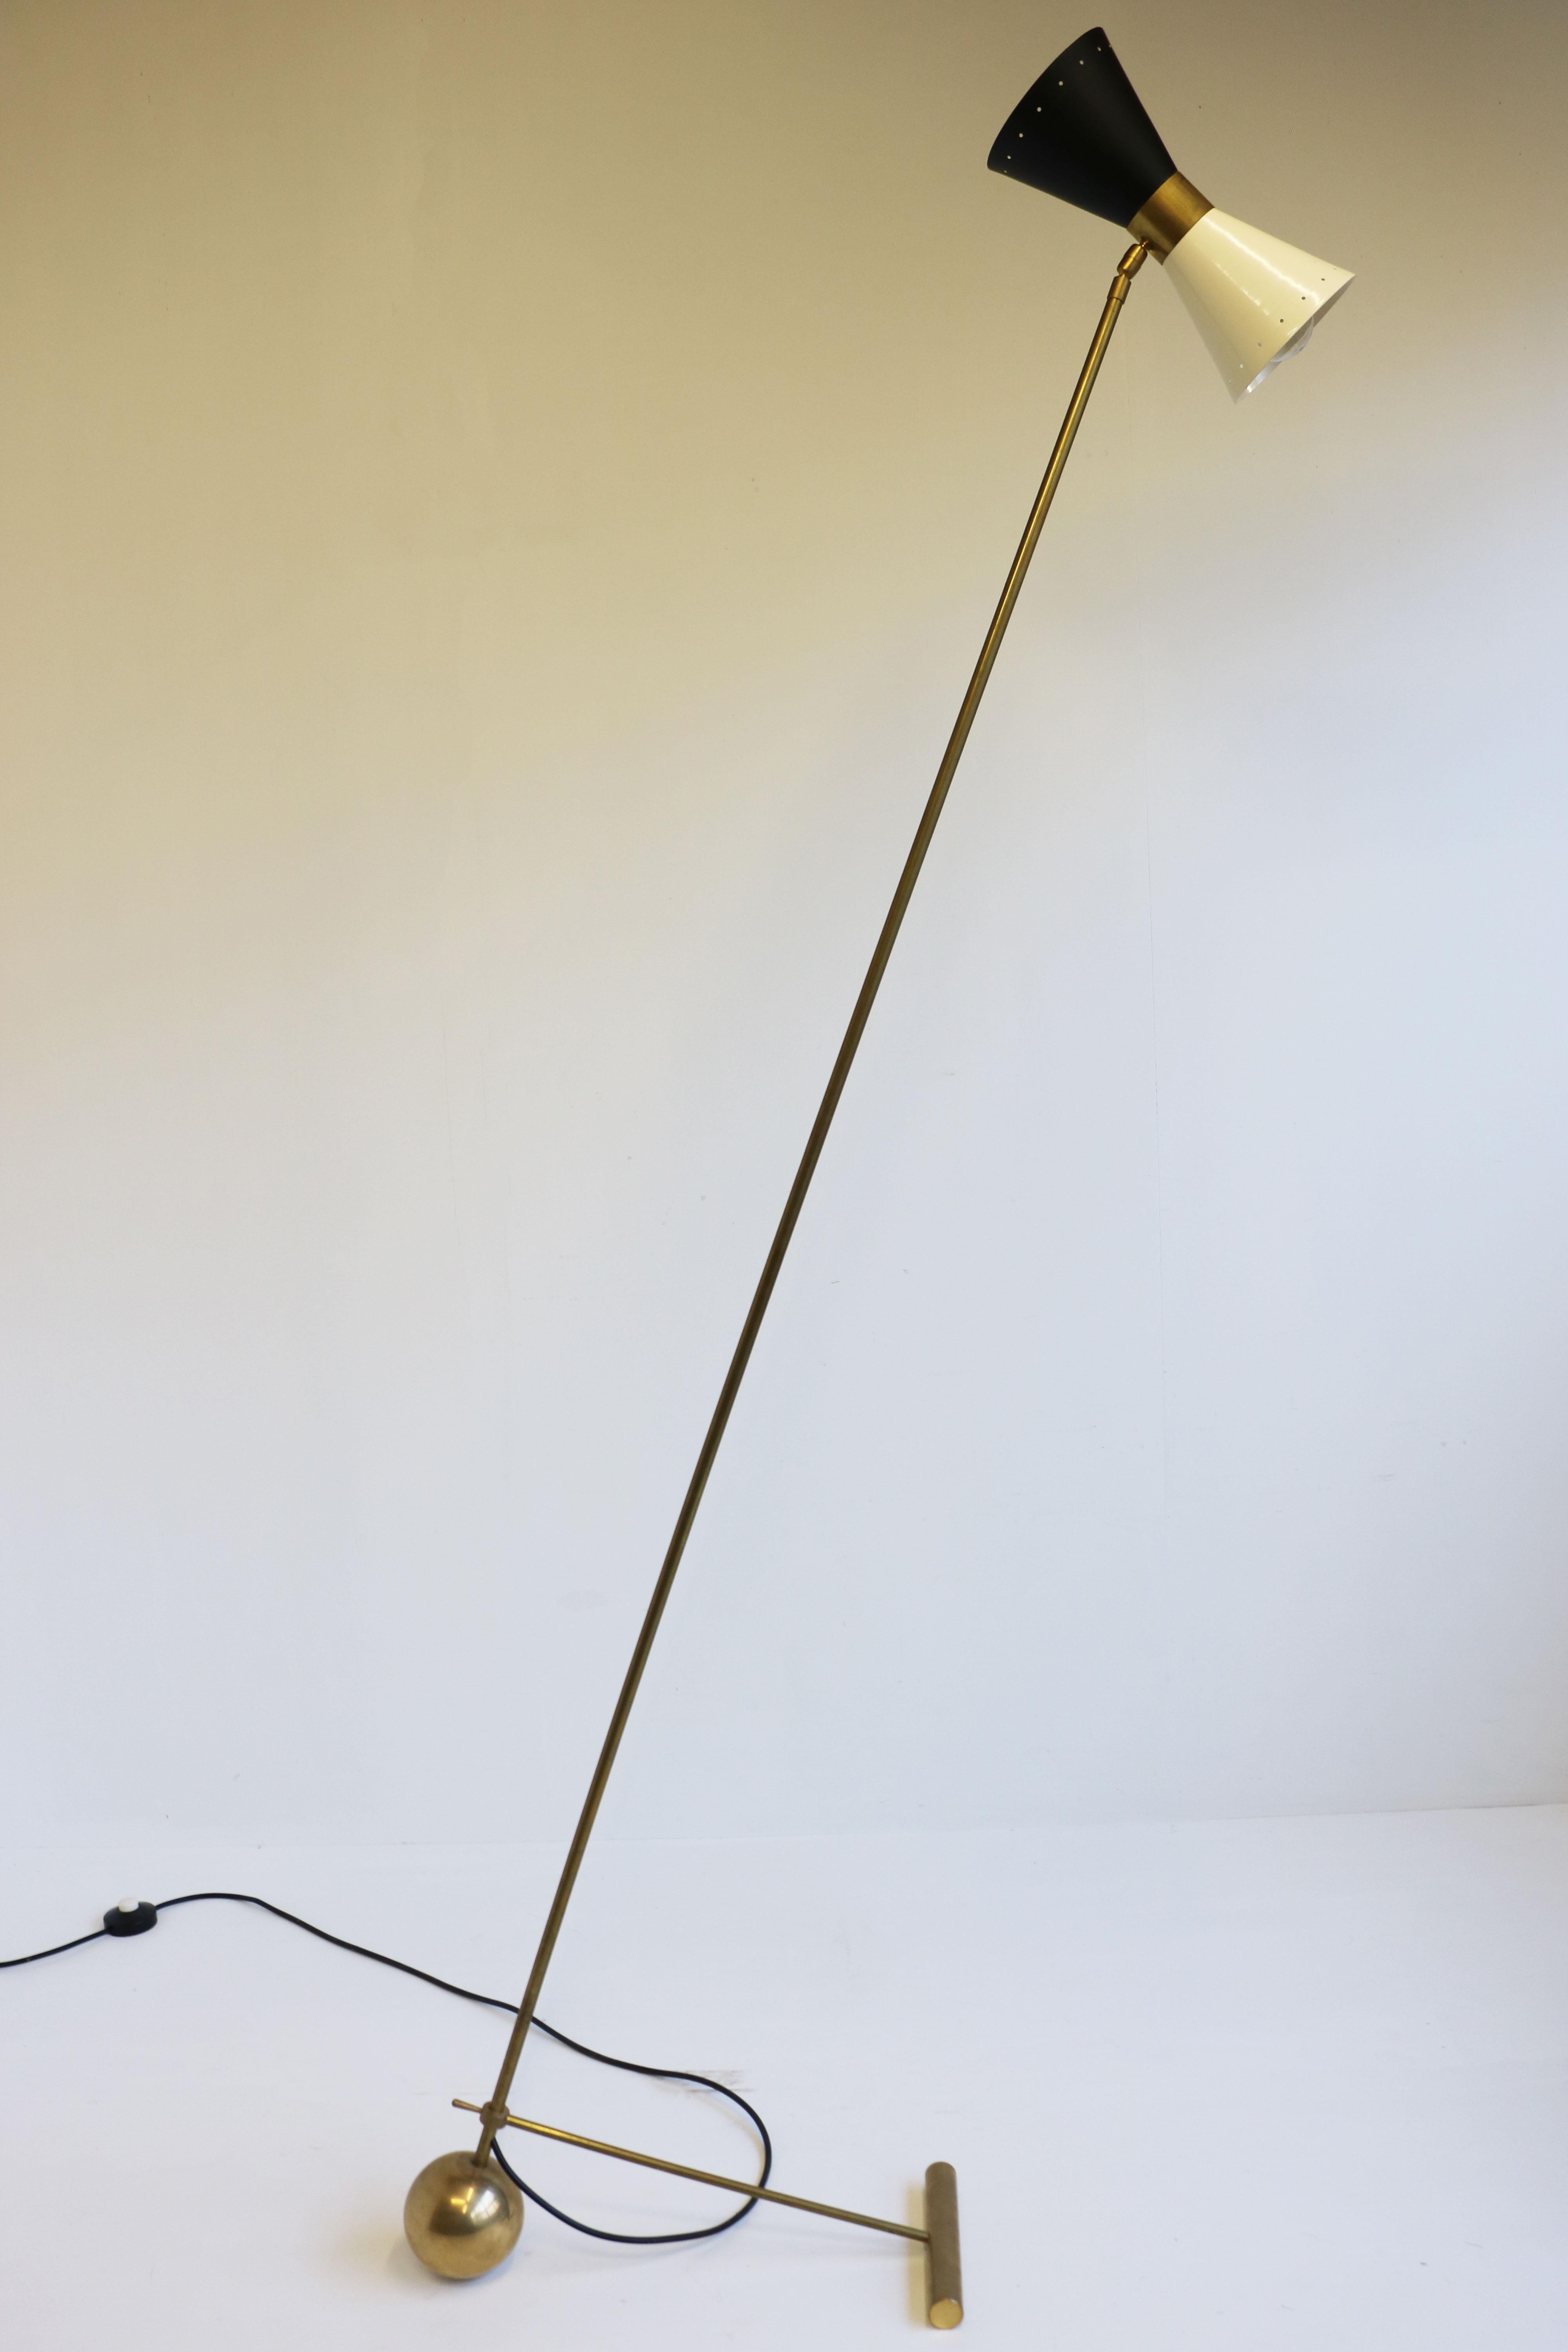 Gorgeous minimalist Italian design floor lamp in style of Stilnovo 1950. 
Frame made out of patinated brass with unique minimalist design base. Gorgeous diabolo shaped shade in black & white. Timeless design! 
The angle of the floor lamp & the